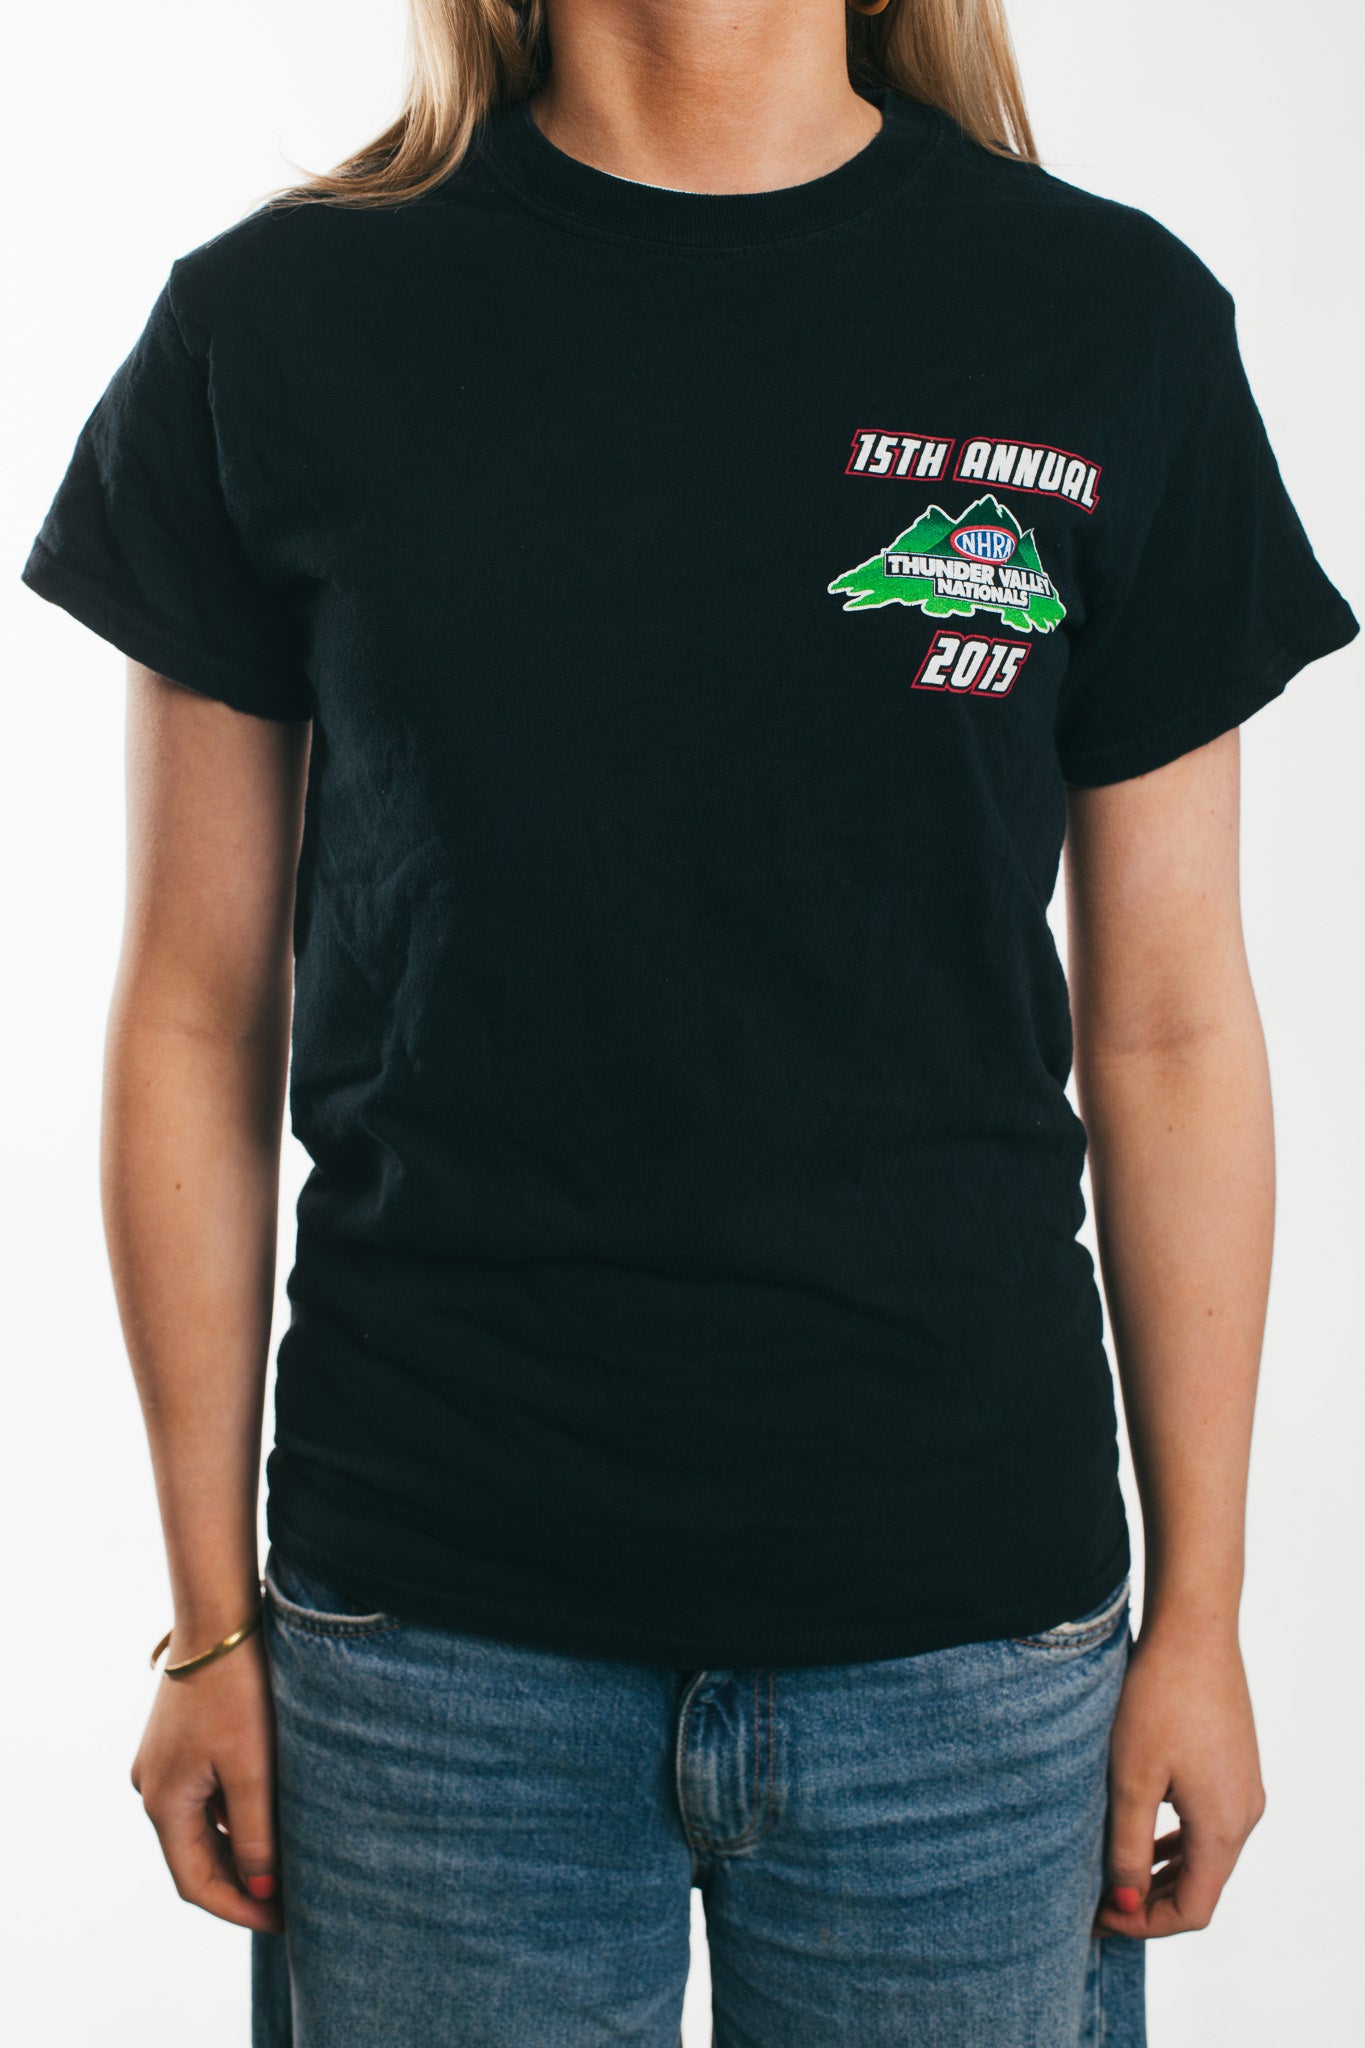 Thunder Valley Nationals - T-Shirt (S)